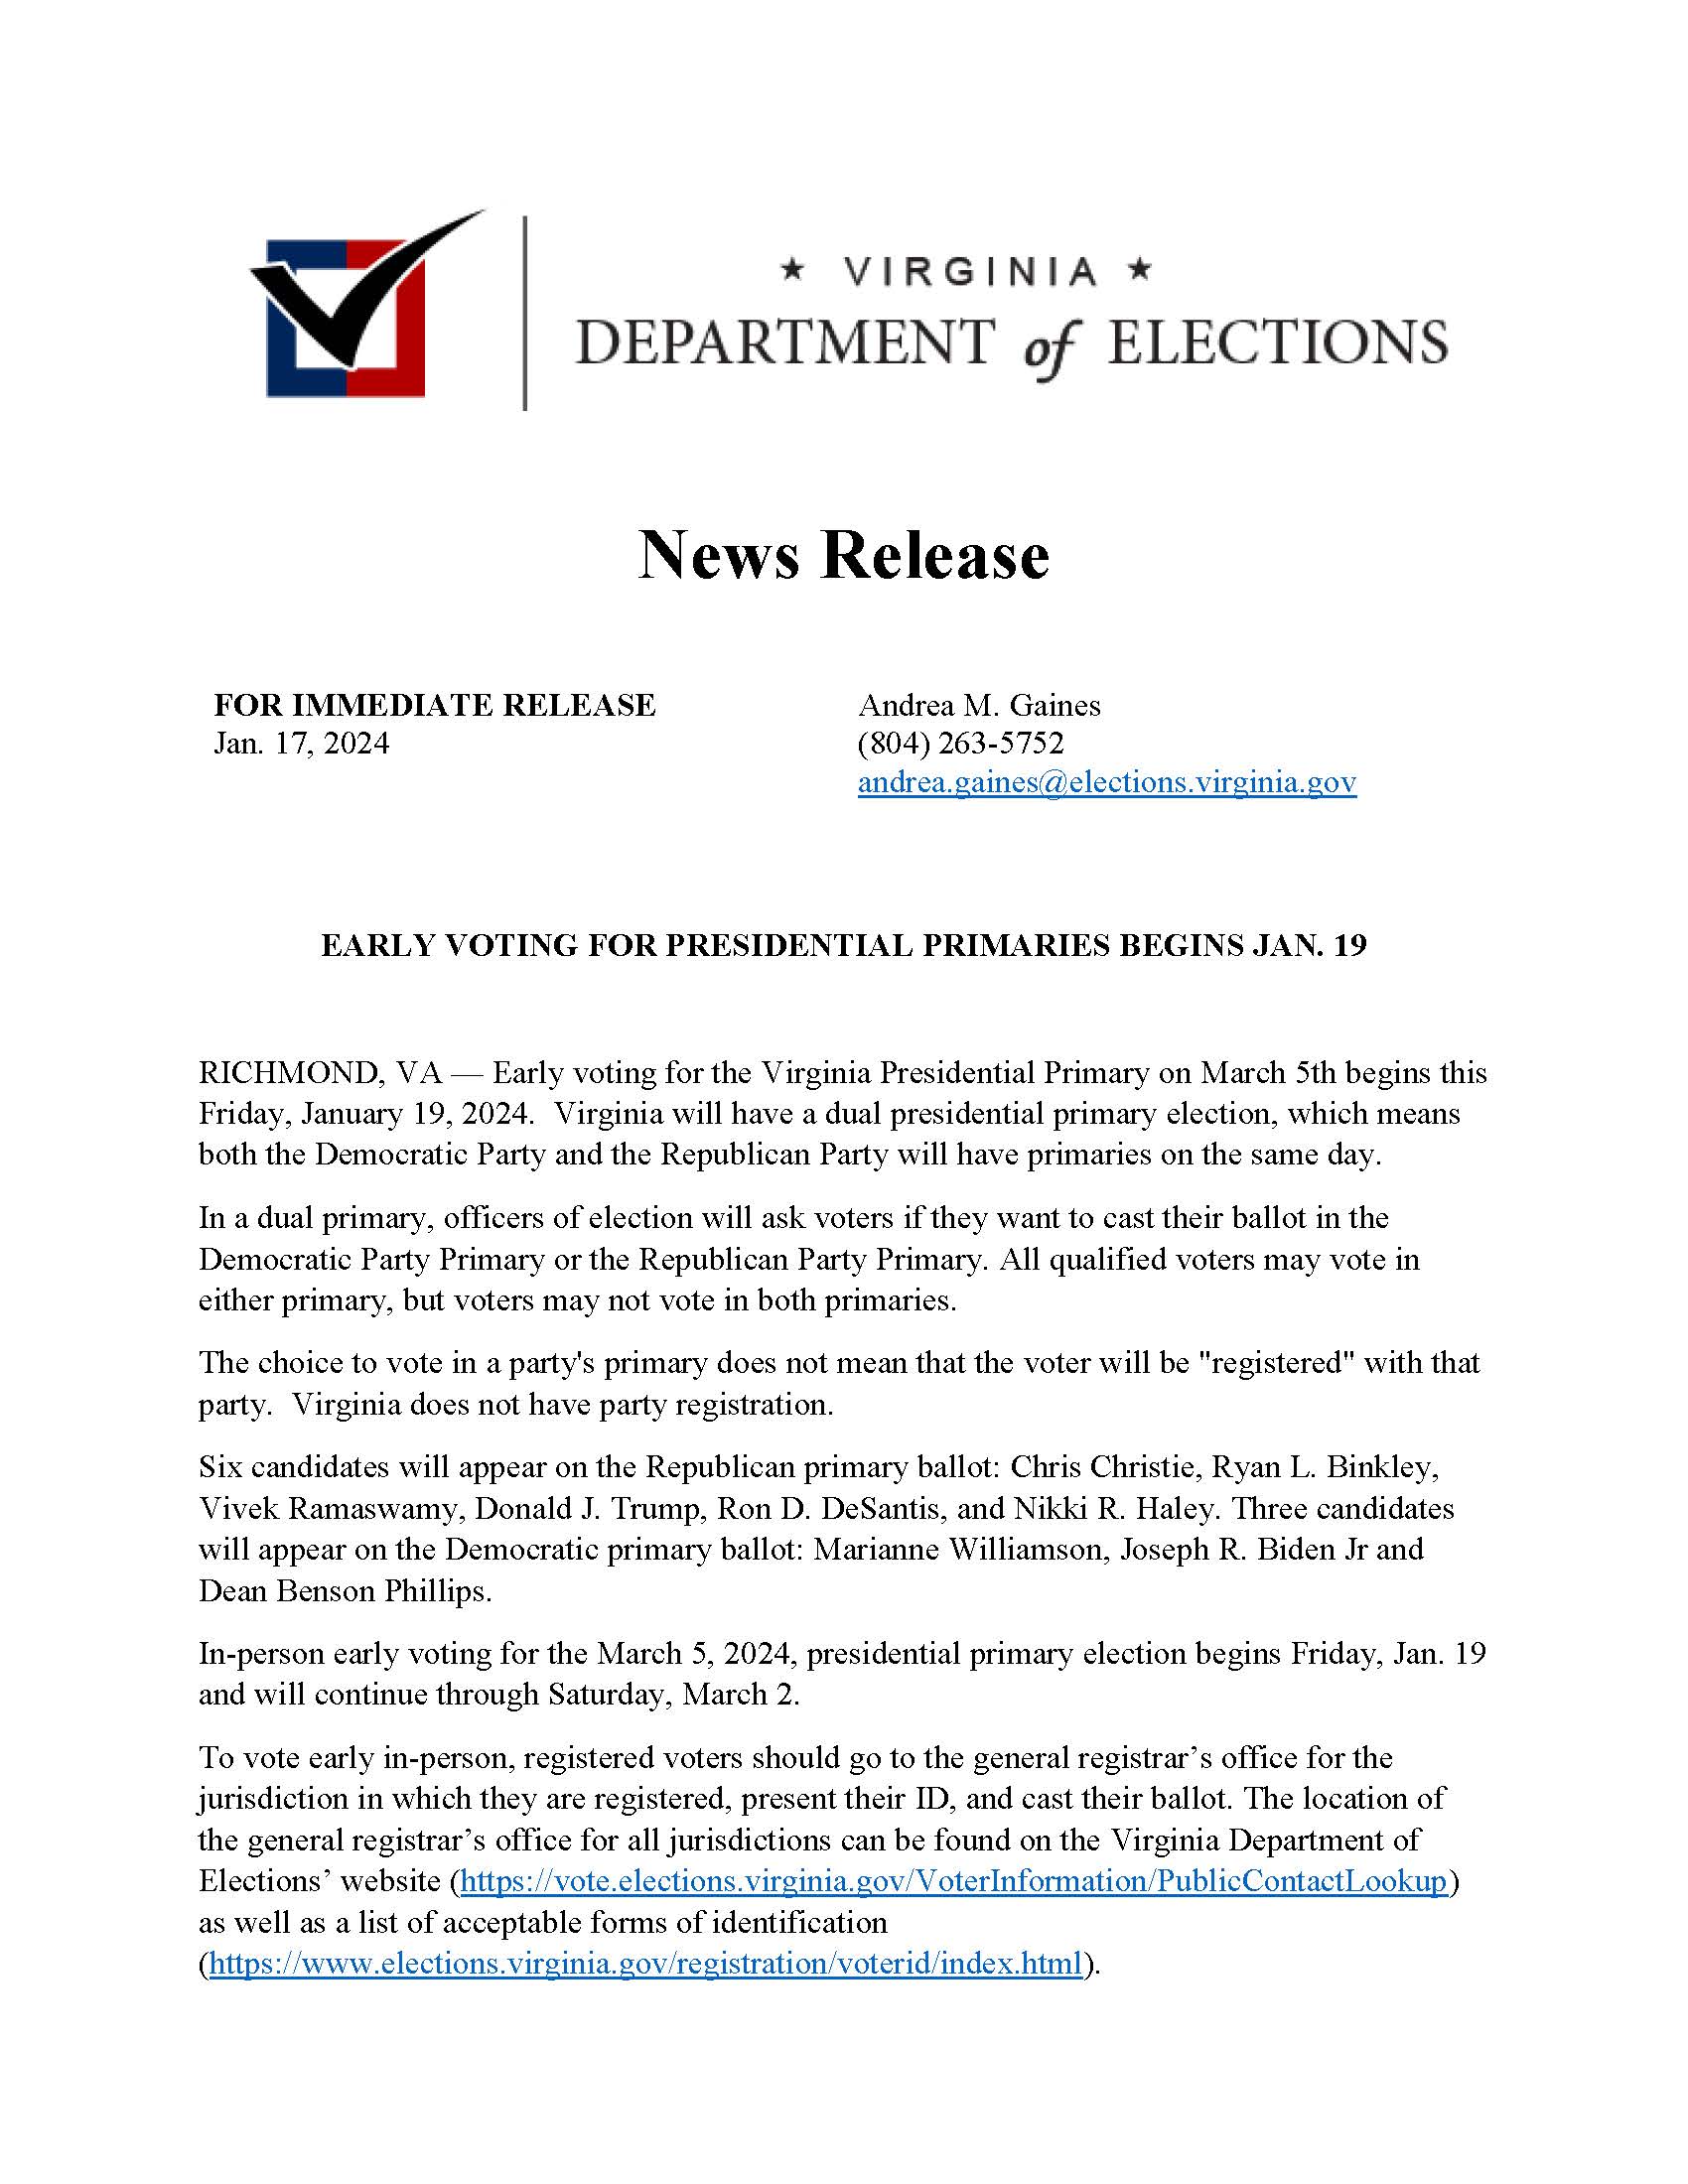 ELECT News Release -Early voting - 2024 Presidential Primary  _Page_1